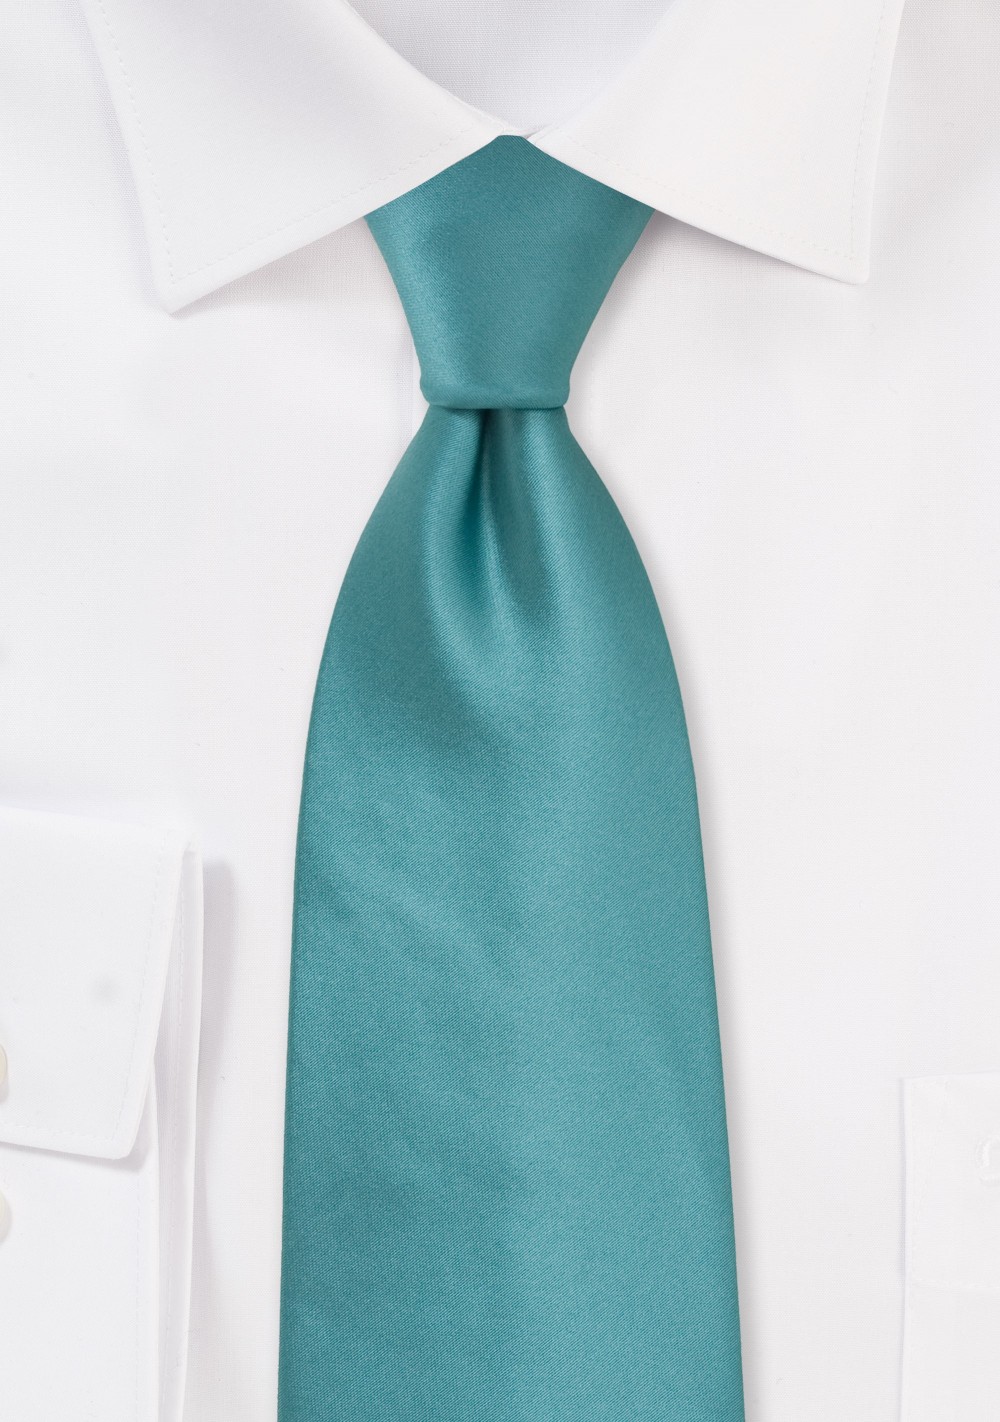 Solid Light Teal Green Tie in Extra Long